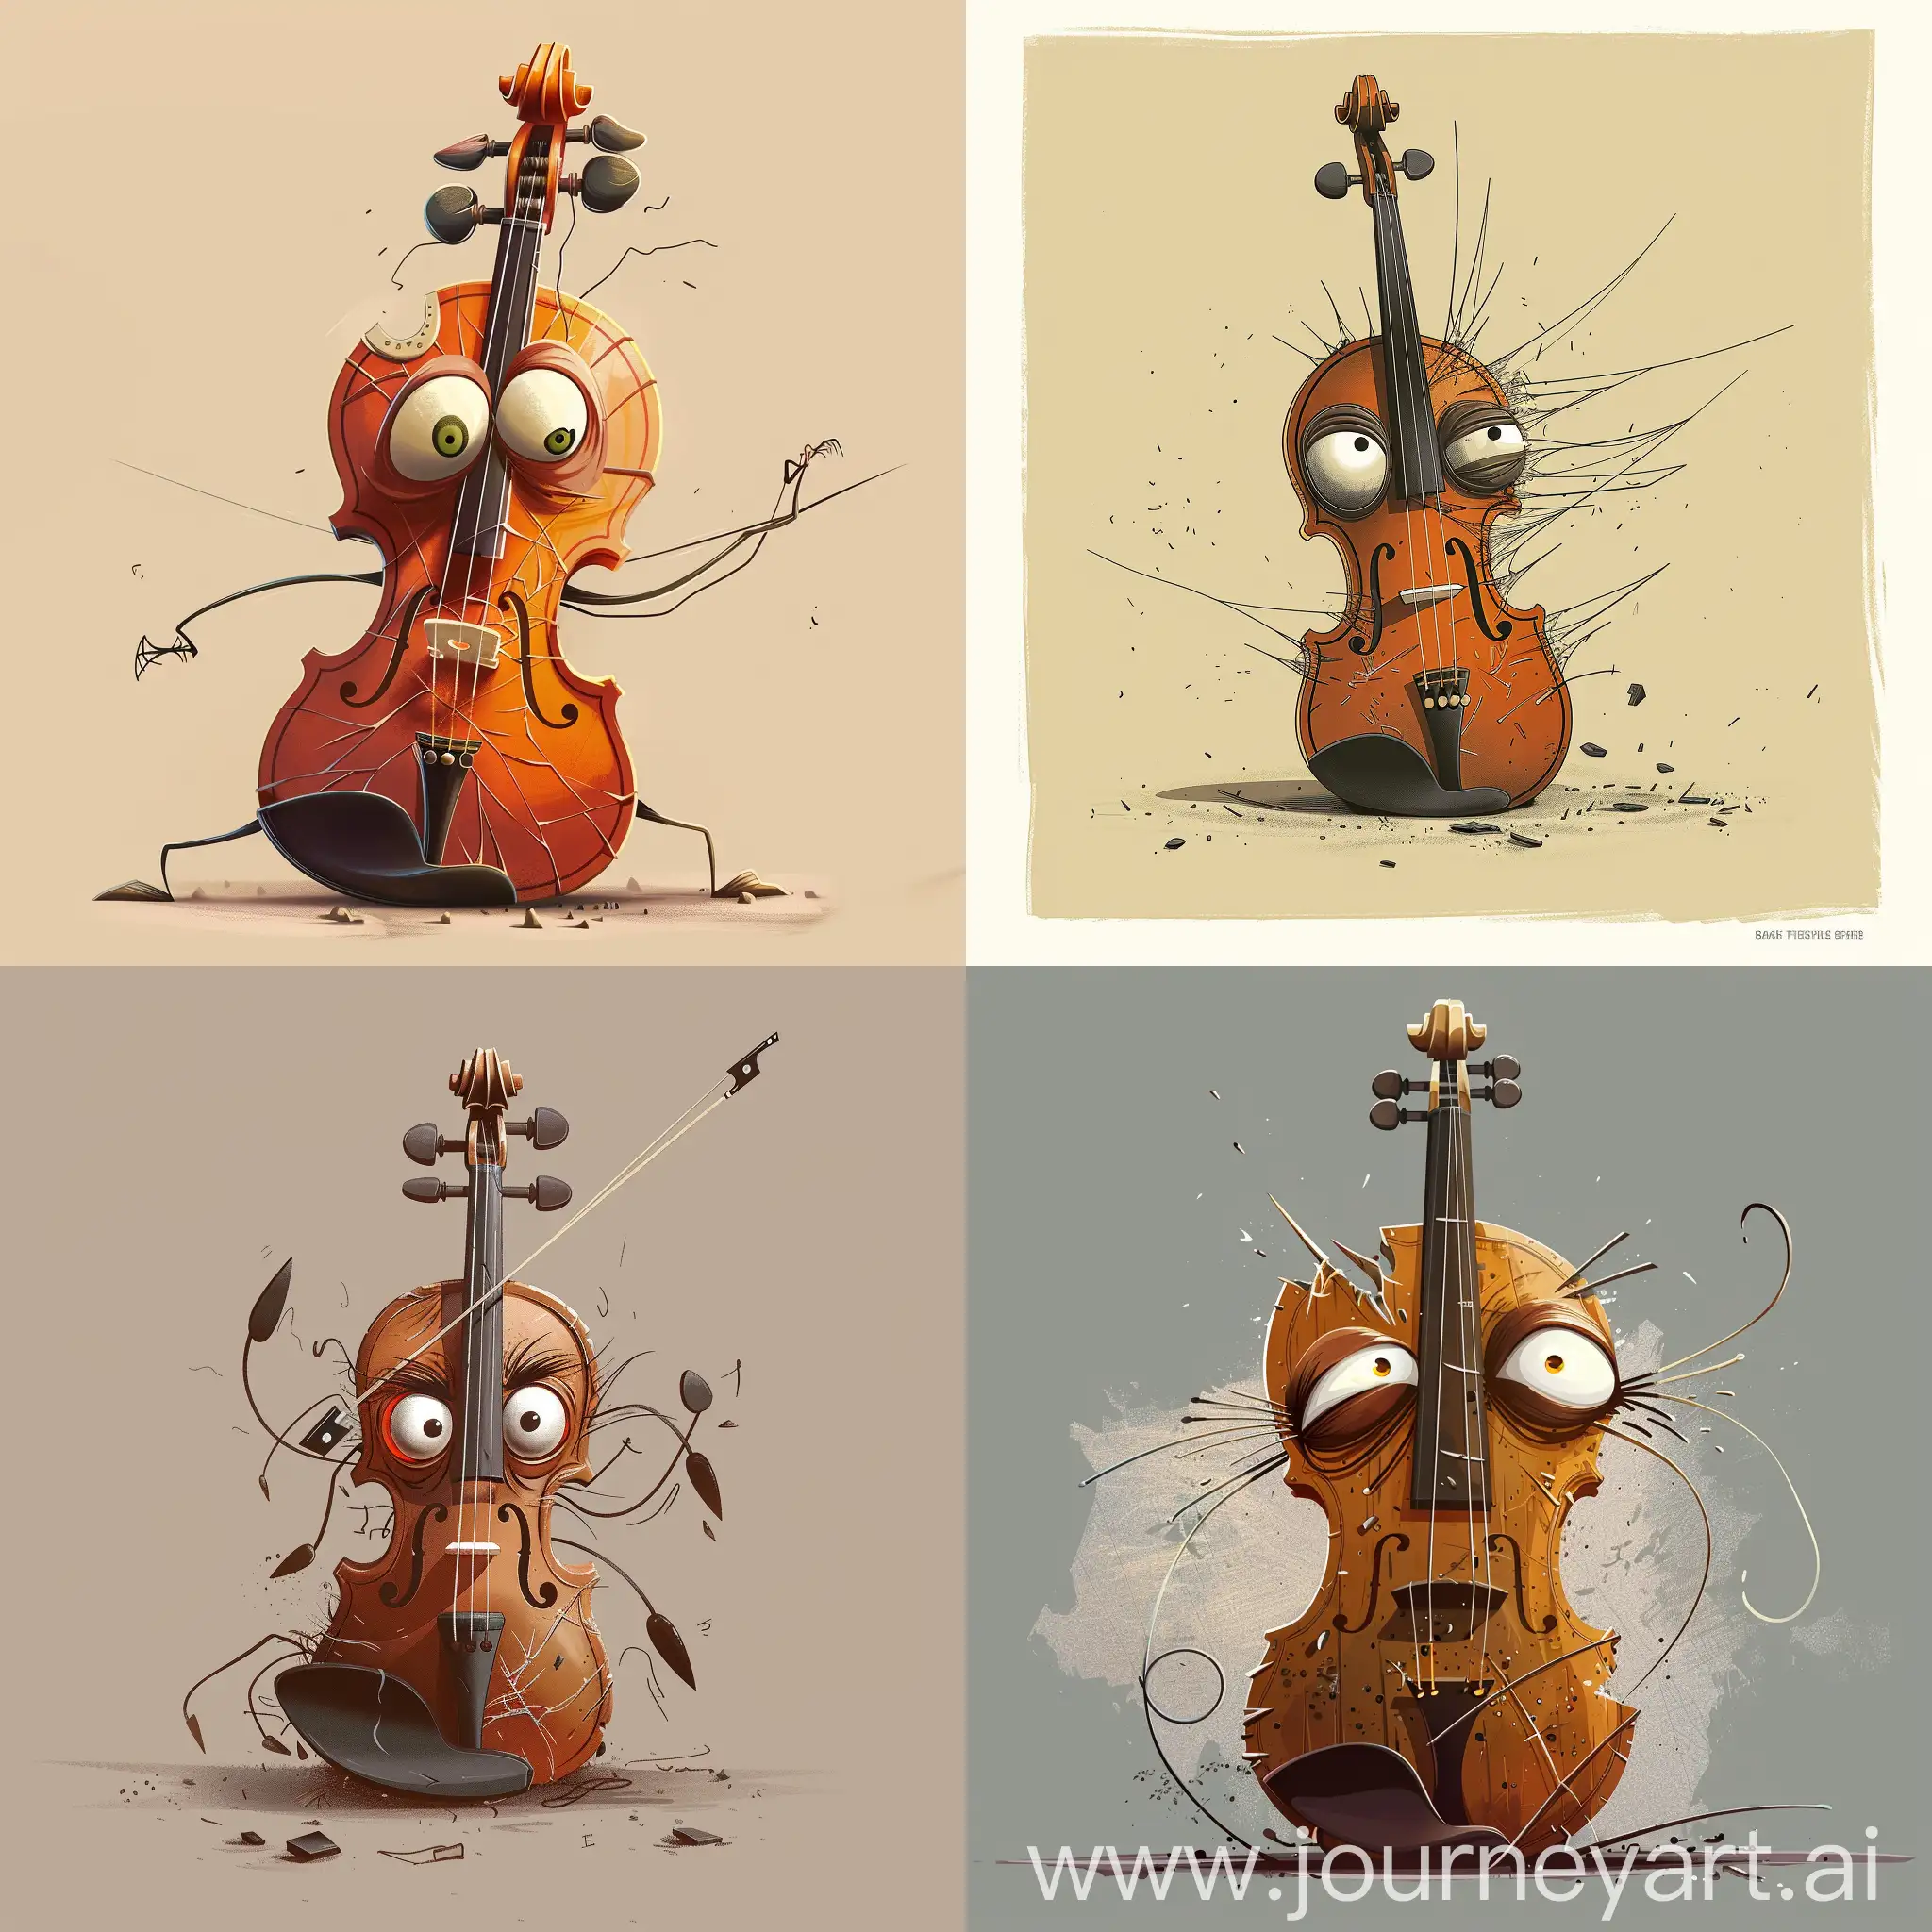 cartoonish character designs of a broken violin with its strings frayed , with eyes and expressions 